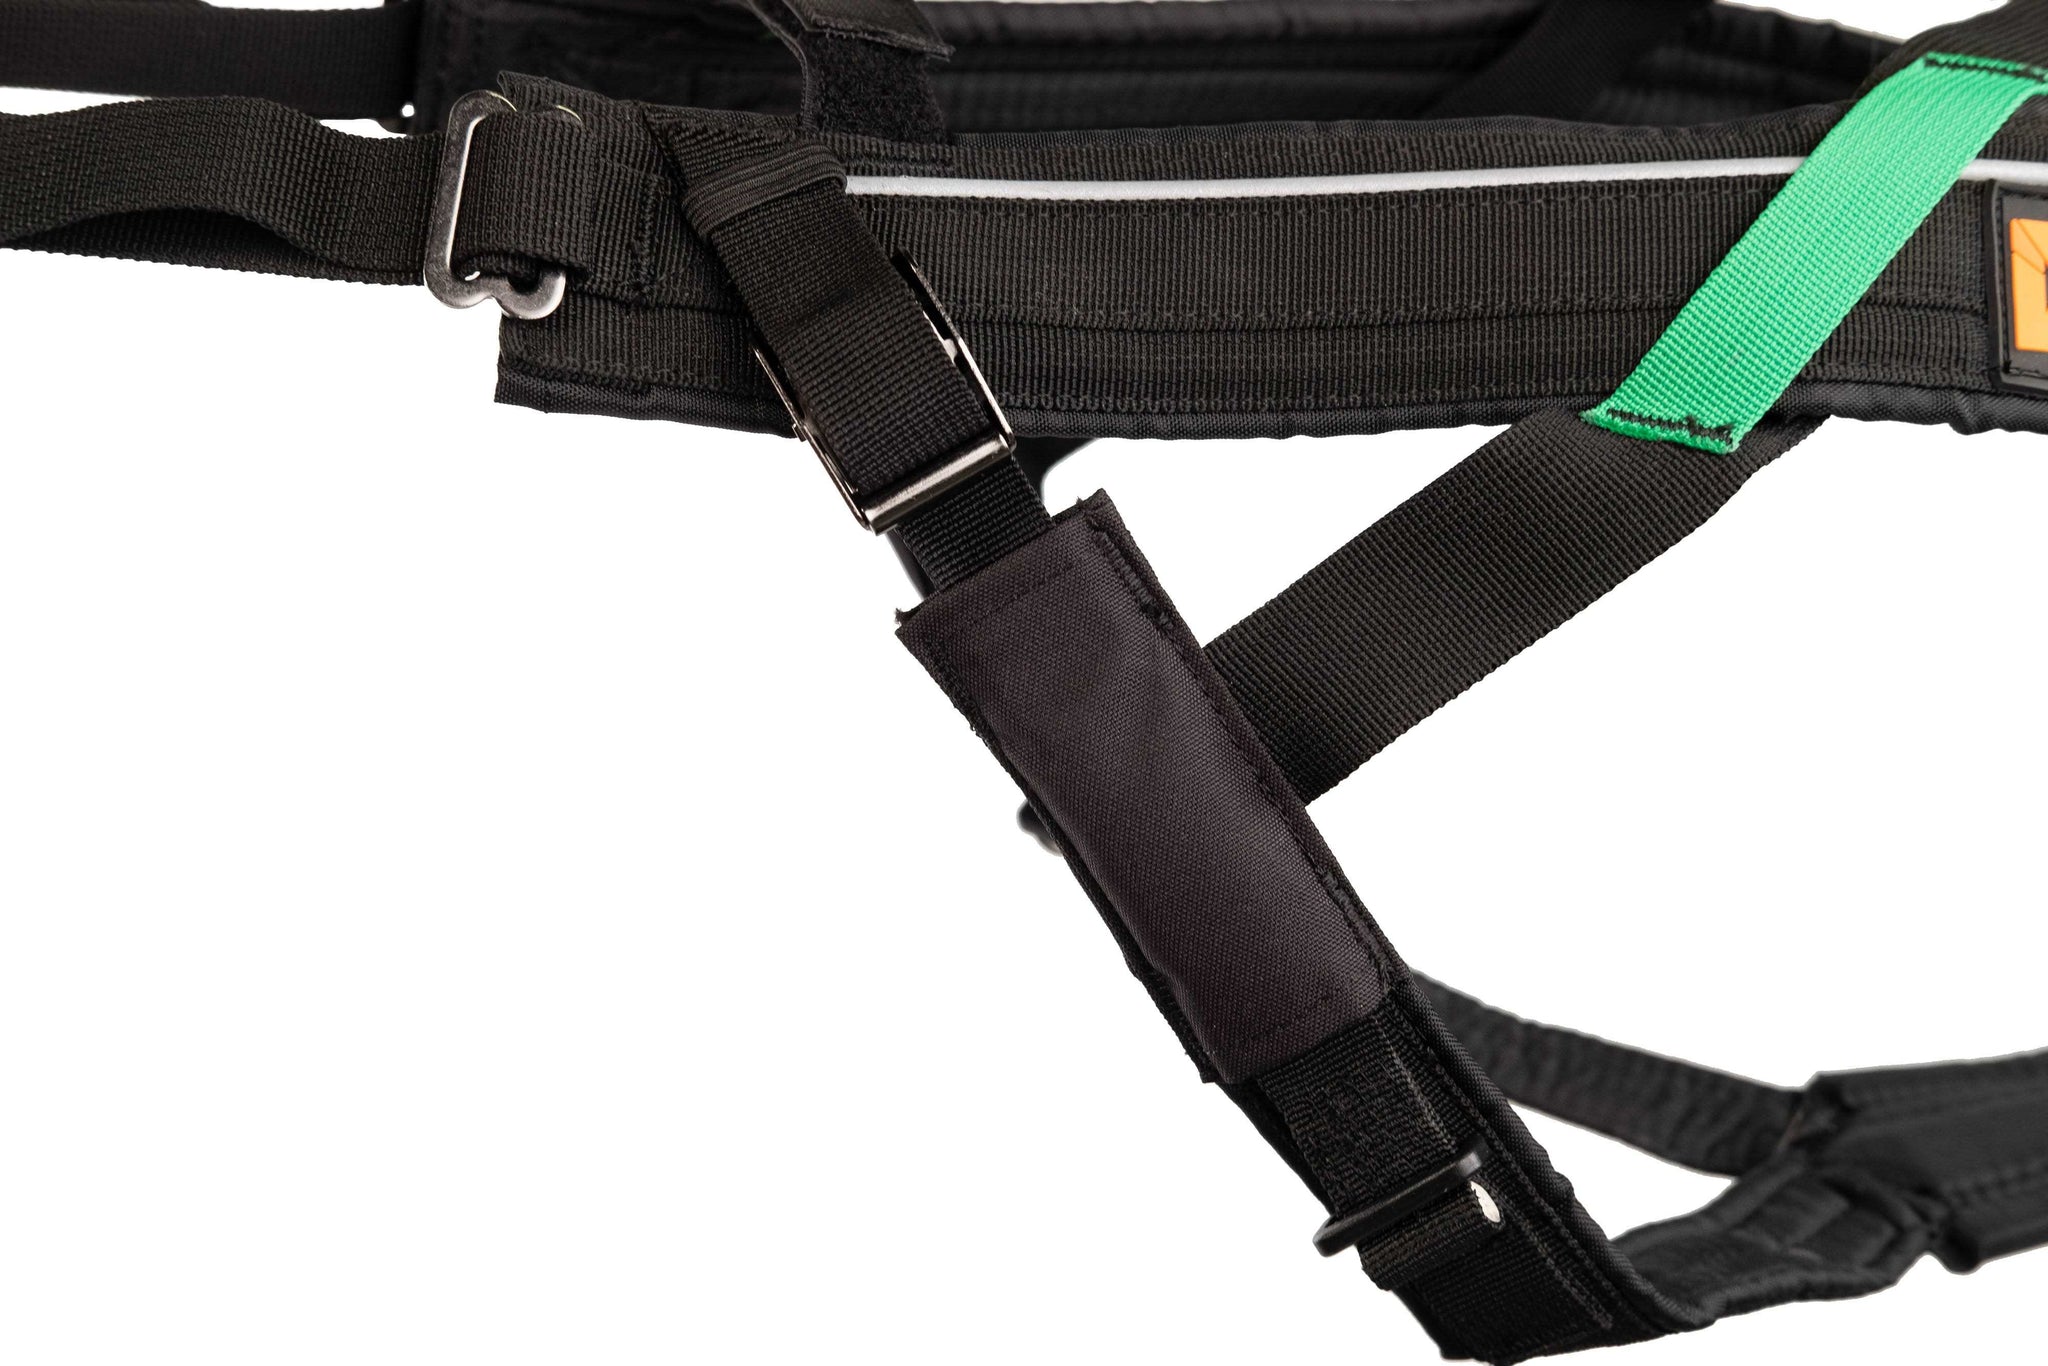 Close up of the adjustable strap area of the Freemotion Harness.